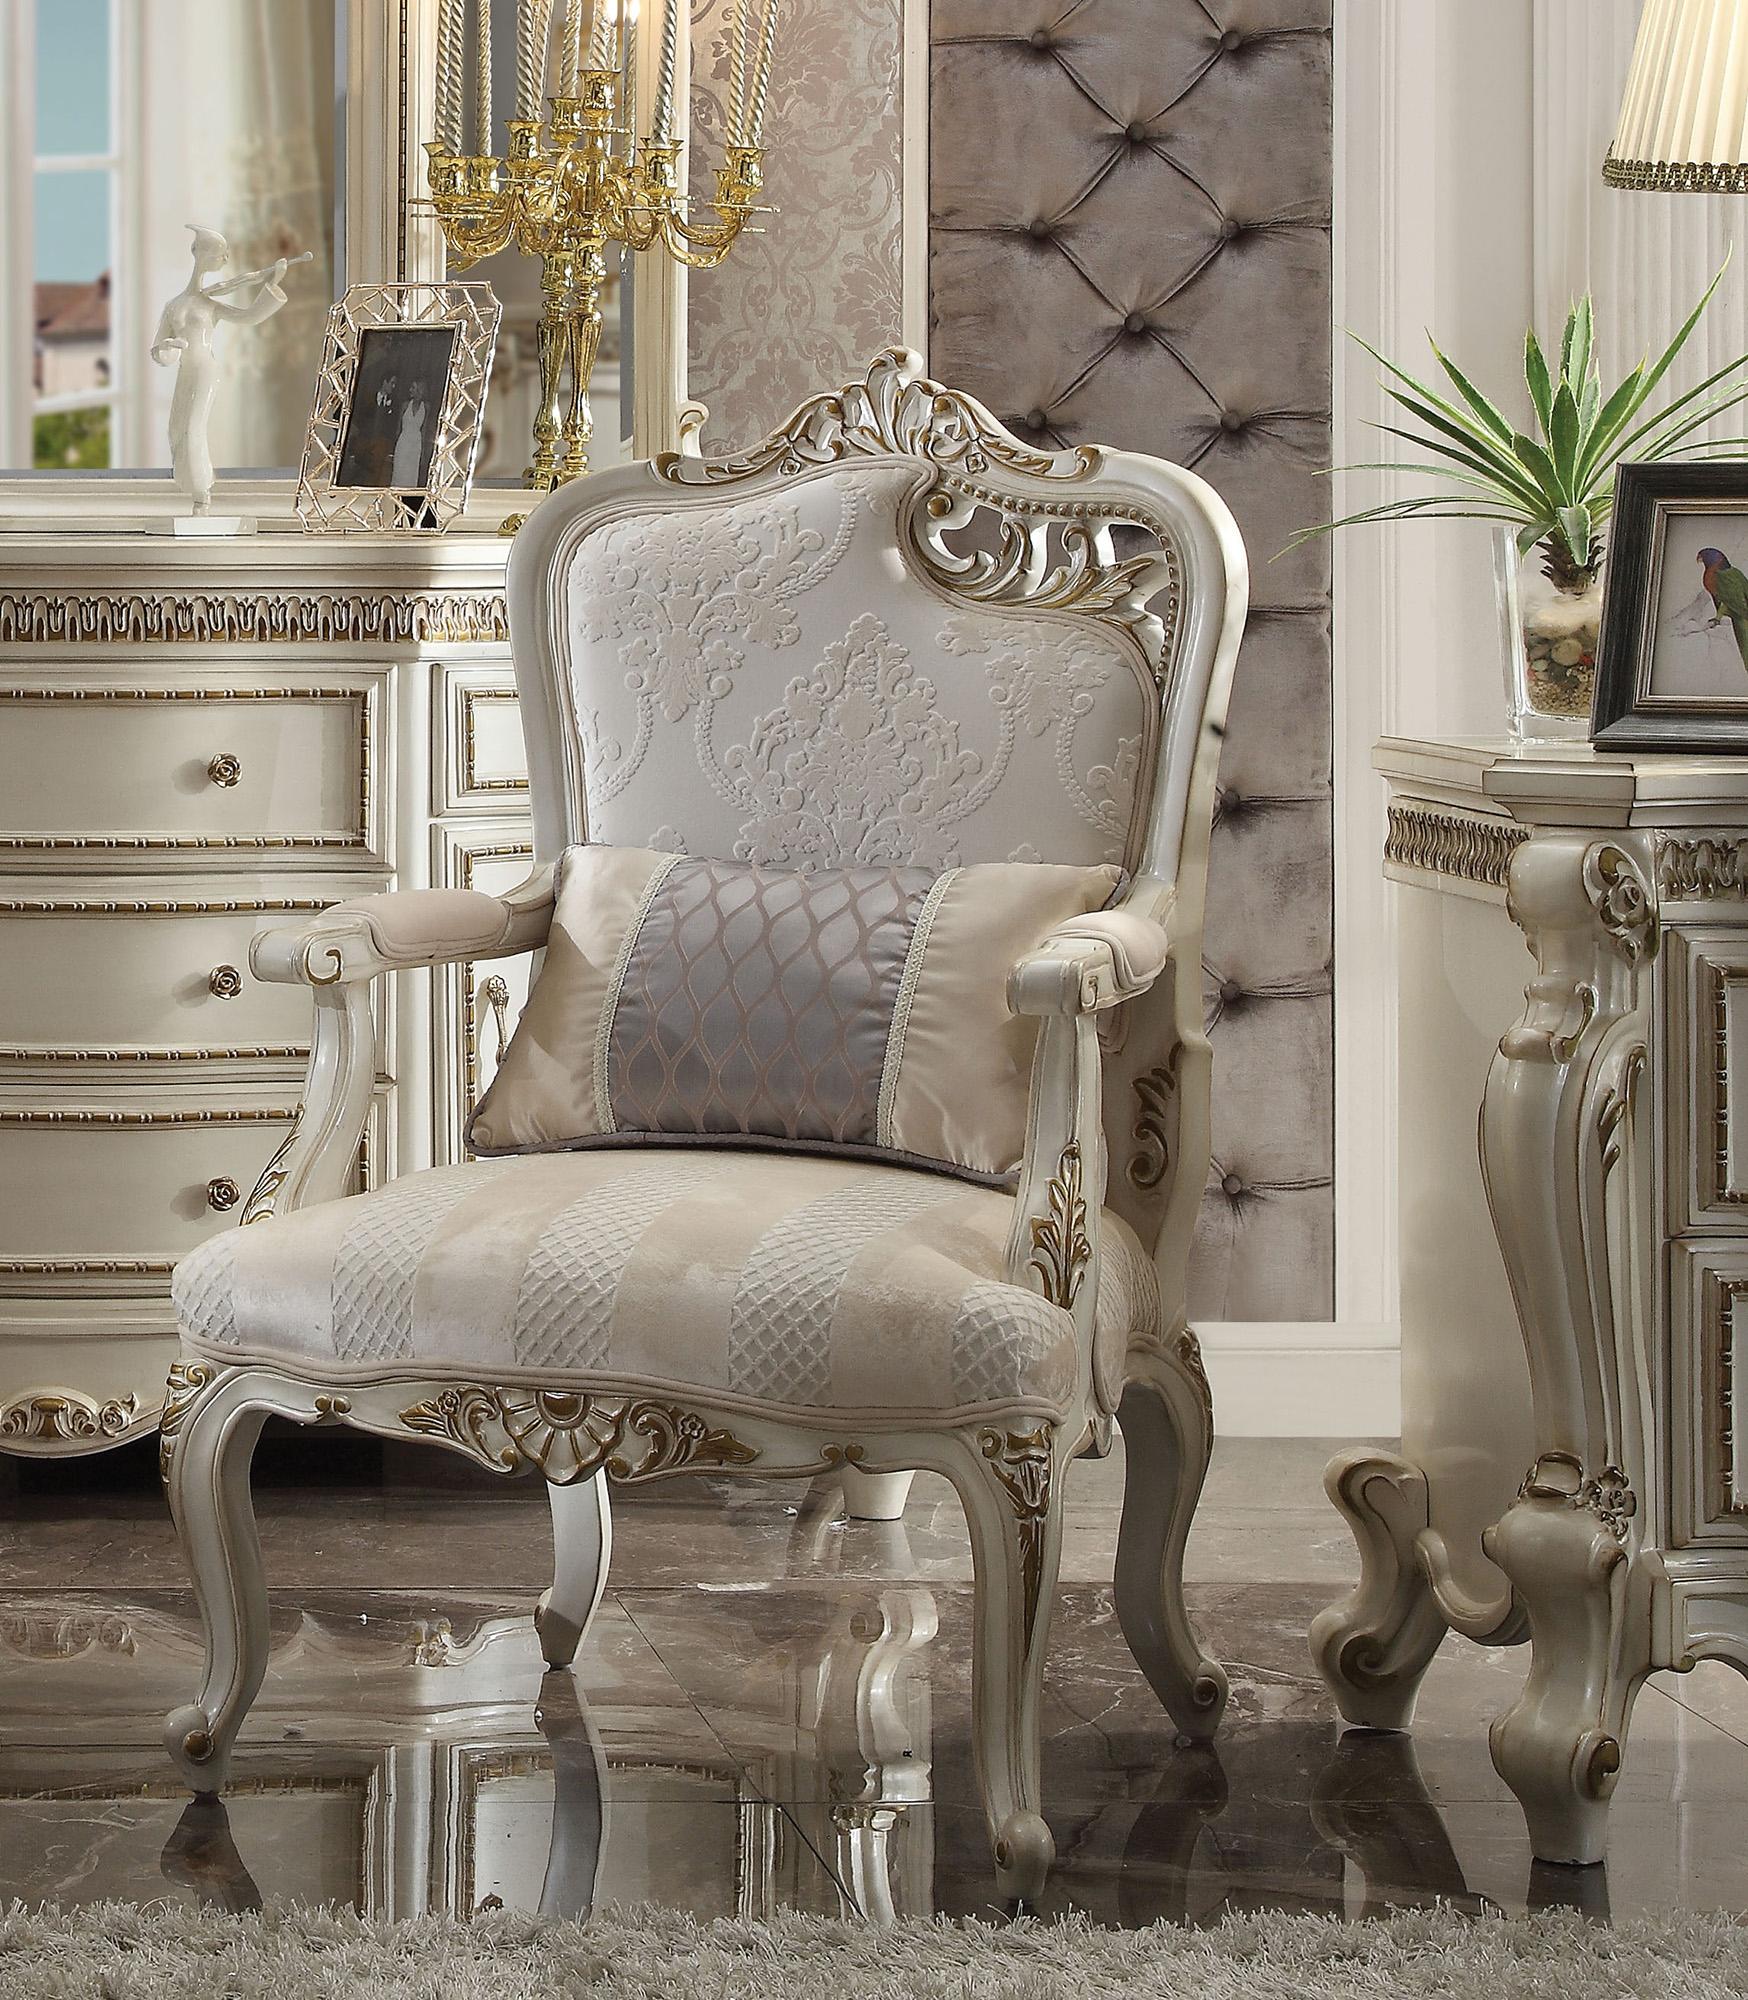 

    
Acme Furniture Picardy II 56883 Accent Chair Set Pearl/Antique 56883-Set-2-Picardy II
